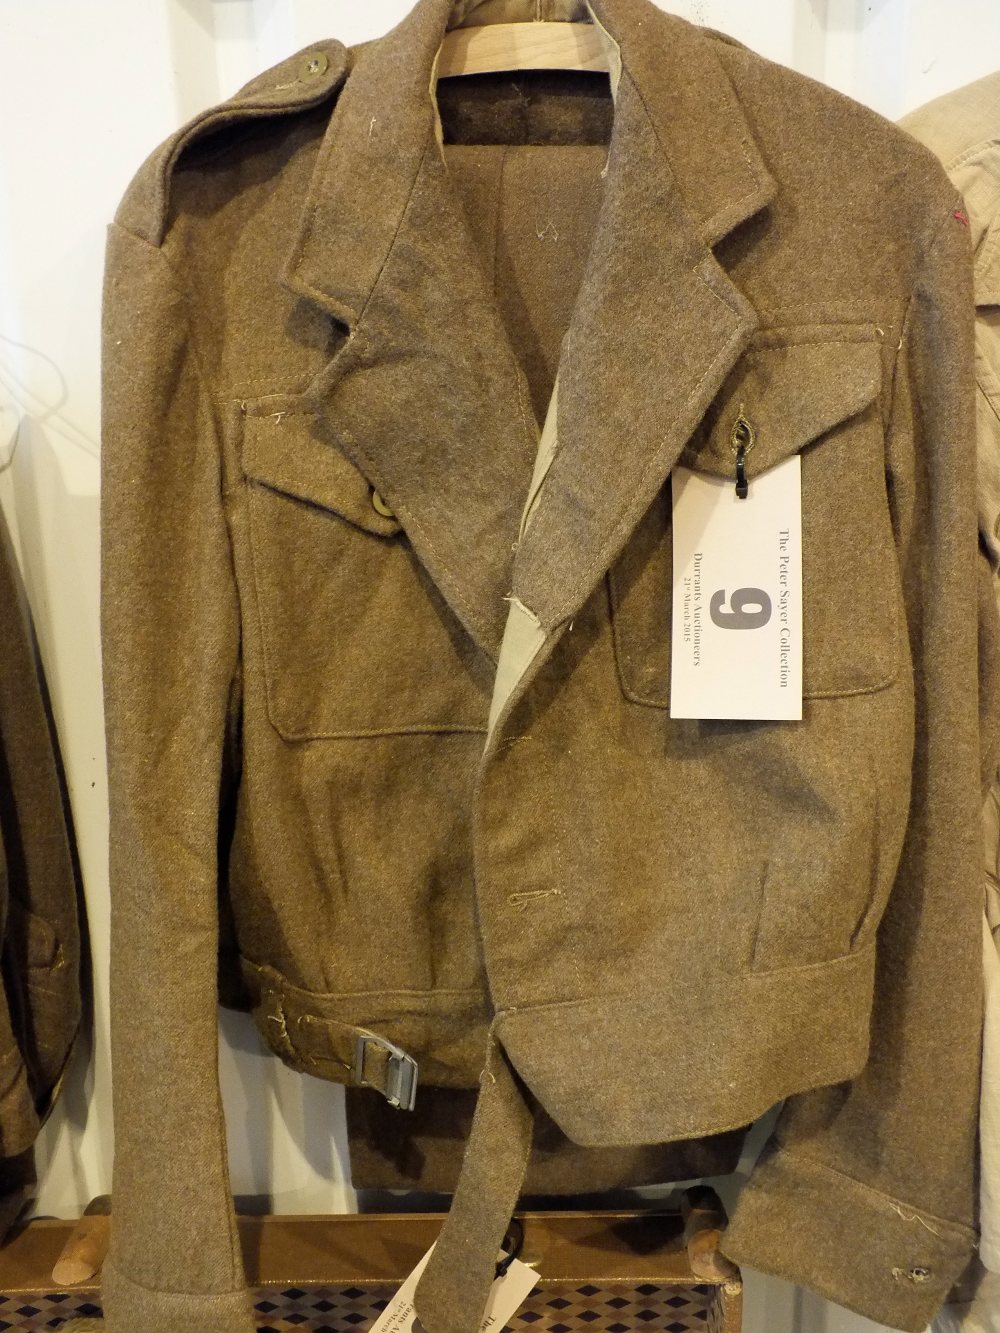 A WWII dated blouse tailored for shirt a